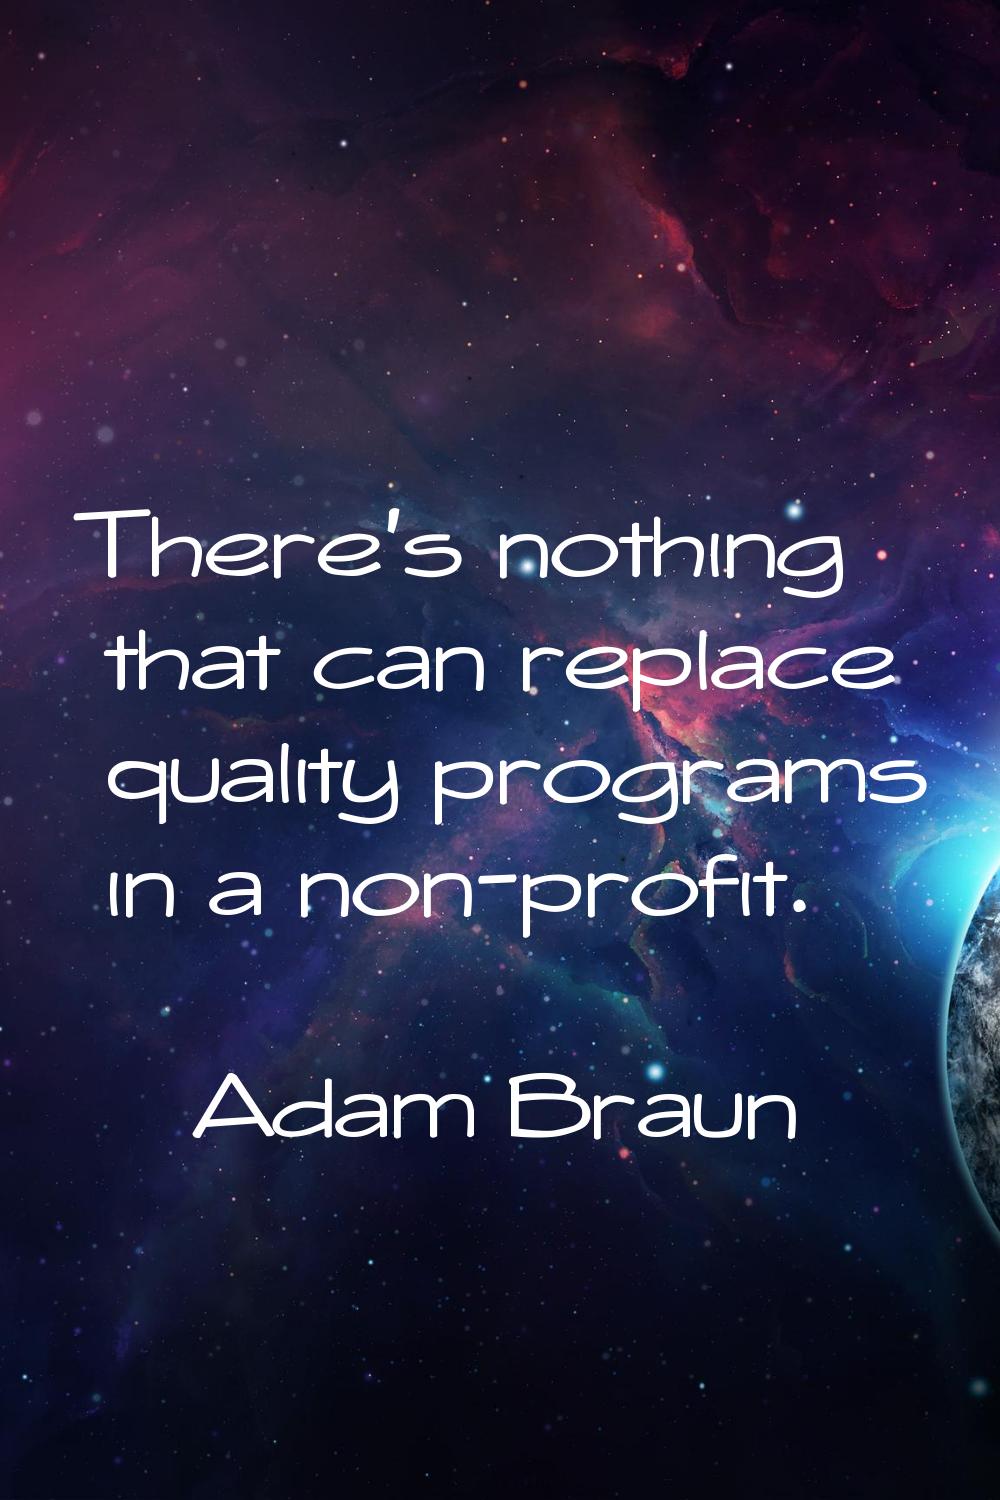 There's nothing that can replace quality programs in a non-profit.